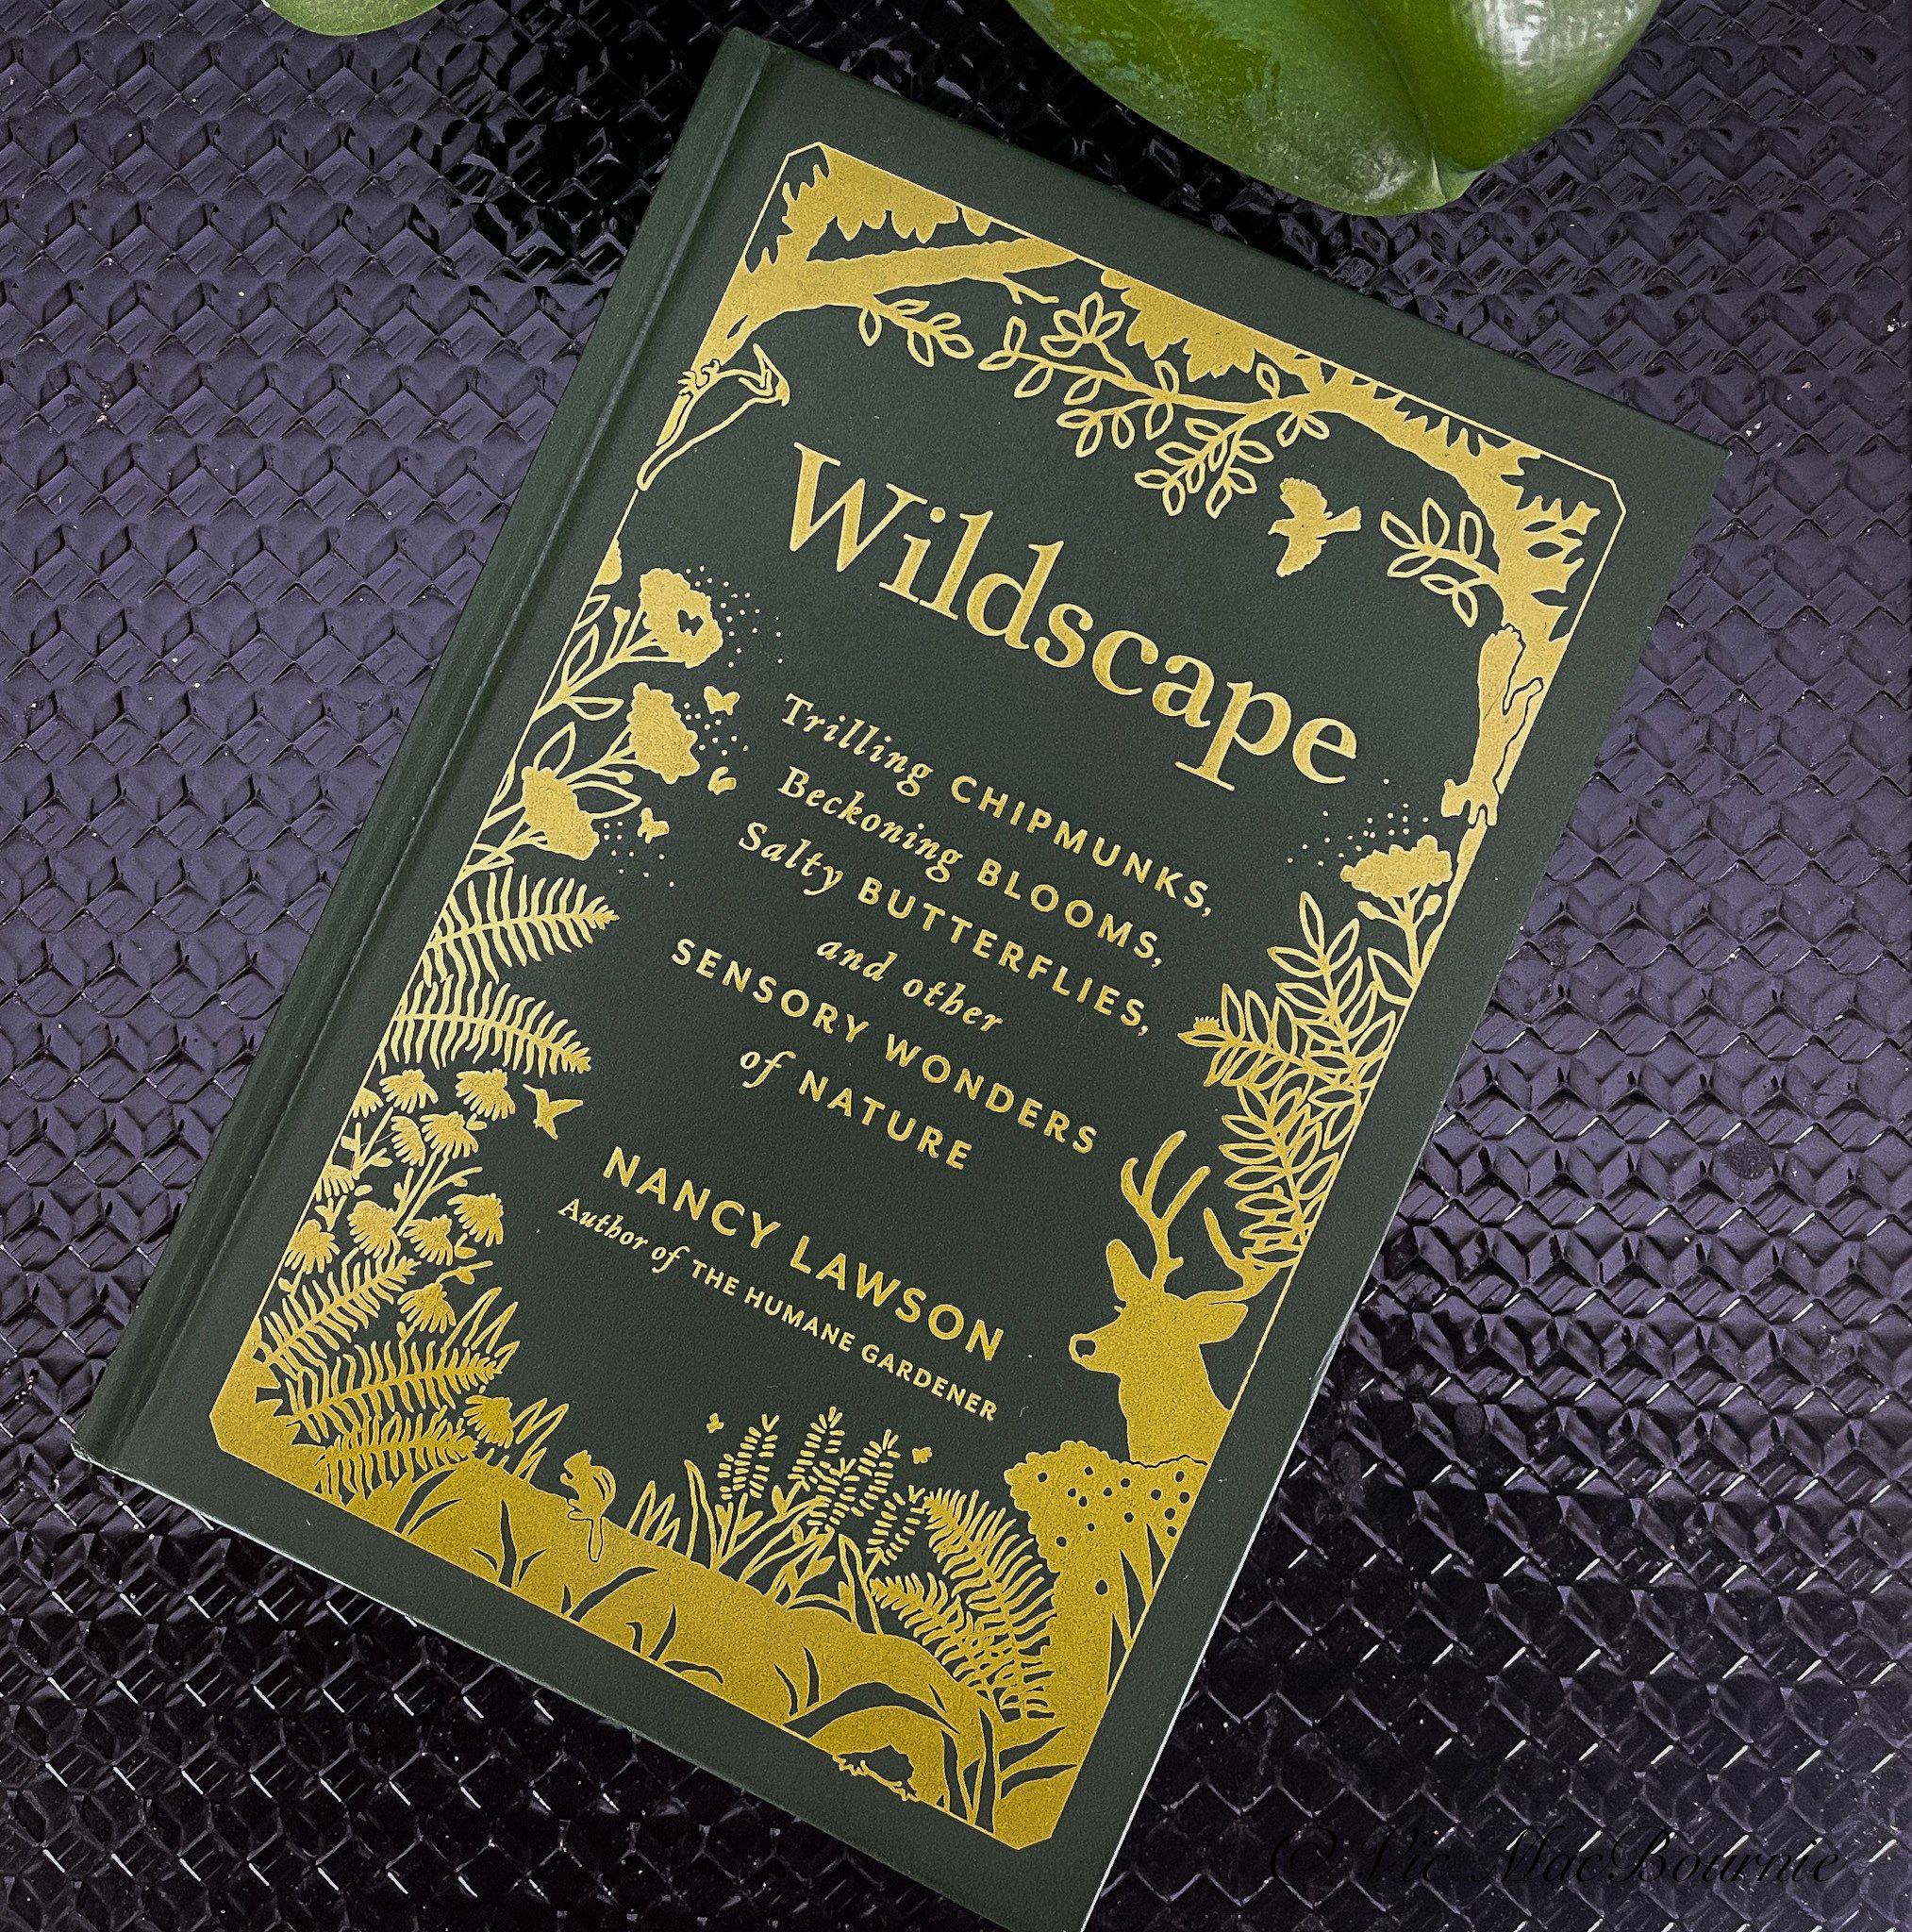 Wildscape: Exploring the senses to live in peace in our gardens